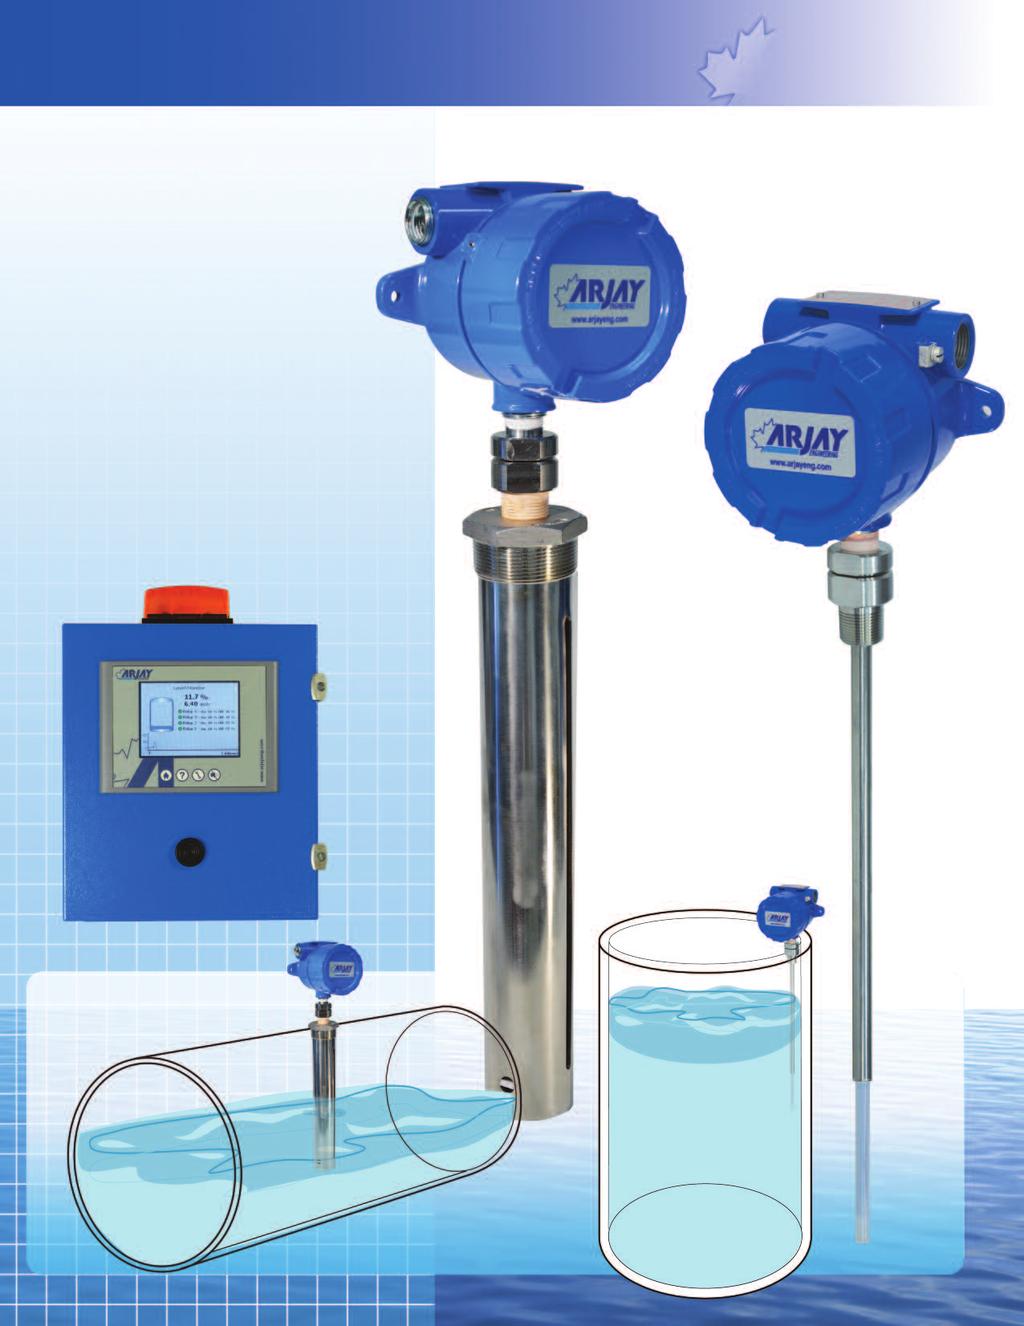 4100-LEV Level-Ease Monitor ENGINEERING Continuous level monitoring of liquids and bulk solids Over 40 years of Arjay s field proven HF capacitance experience has been applied to the Level-Ease 4100